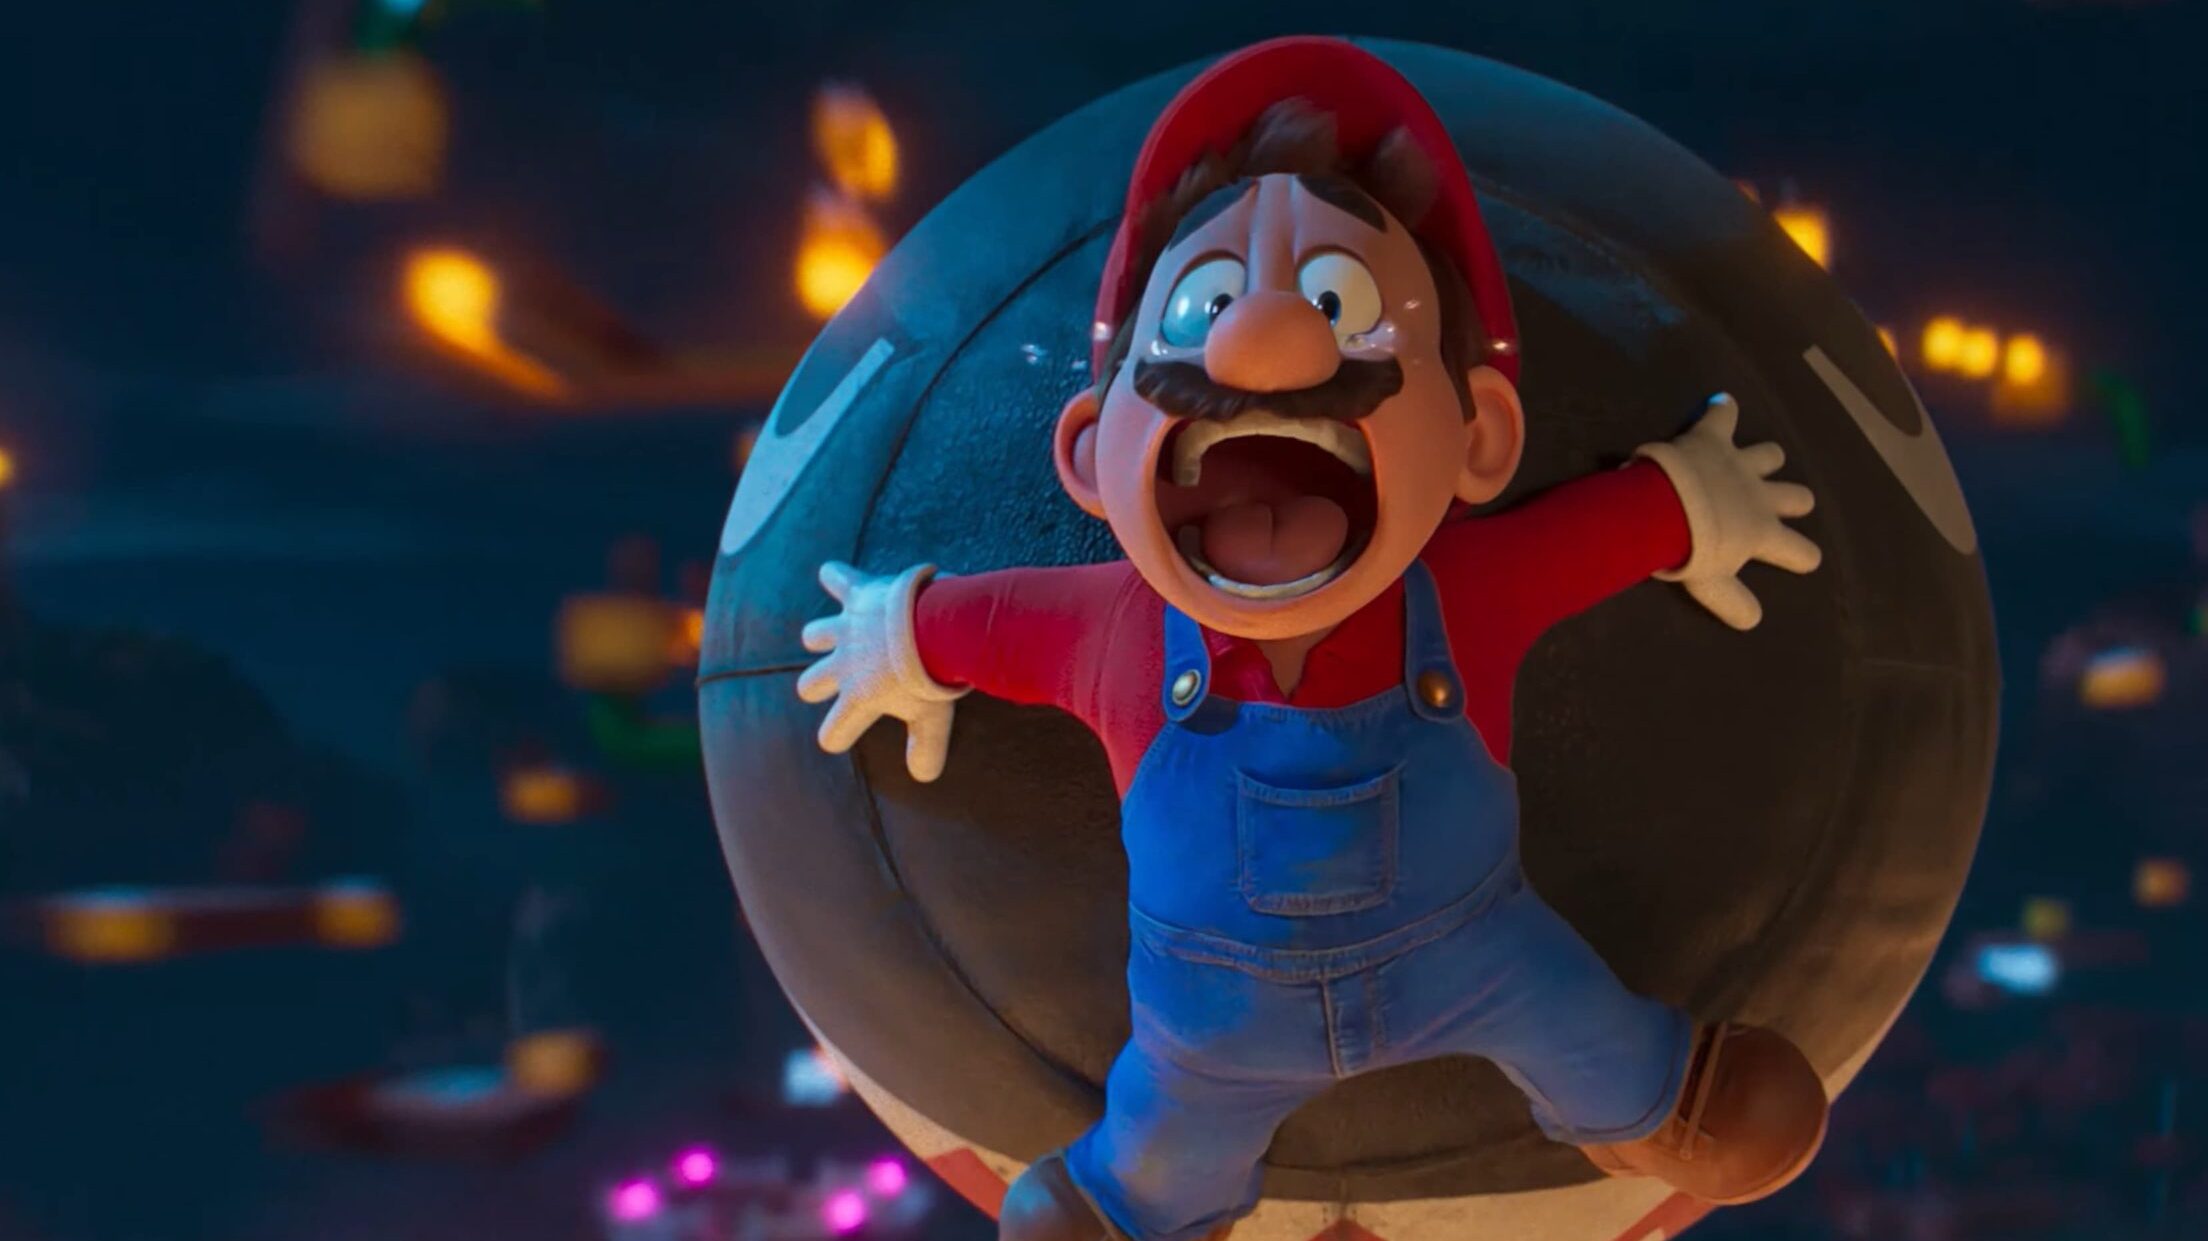 DVD & Blu-Ray Release Date For New Super Mario Bros Movie Announced 